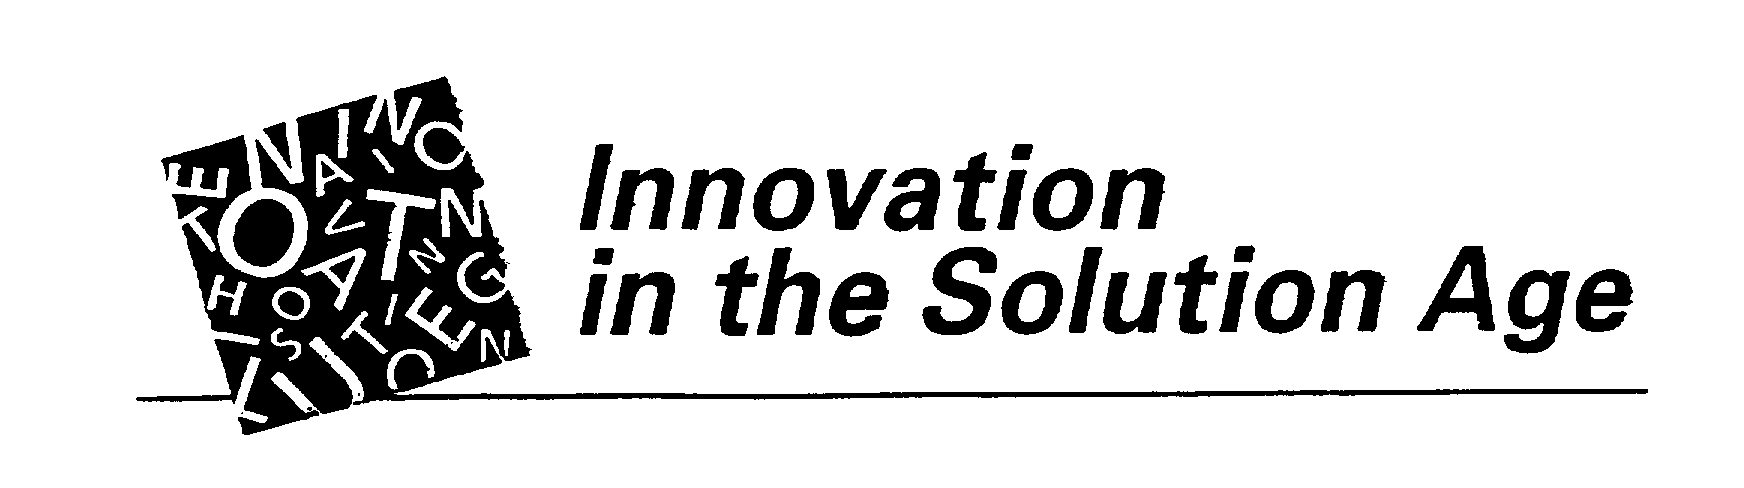  INNOVATION IN THE SOLUTION AGE